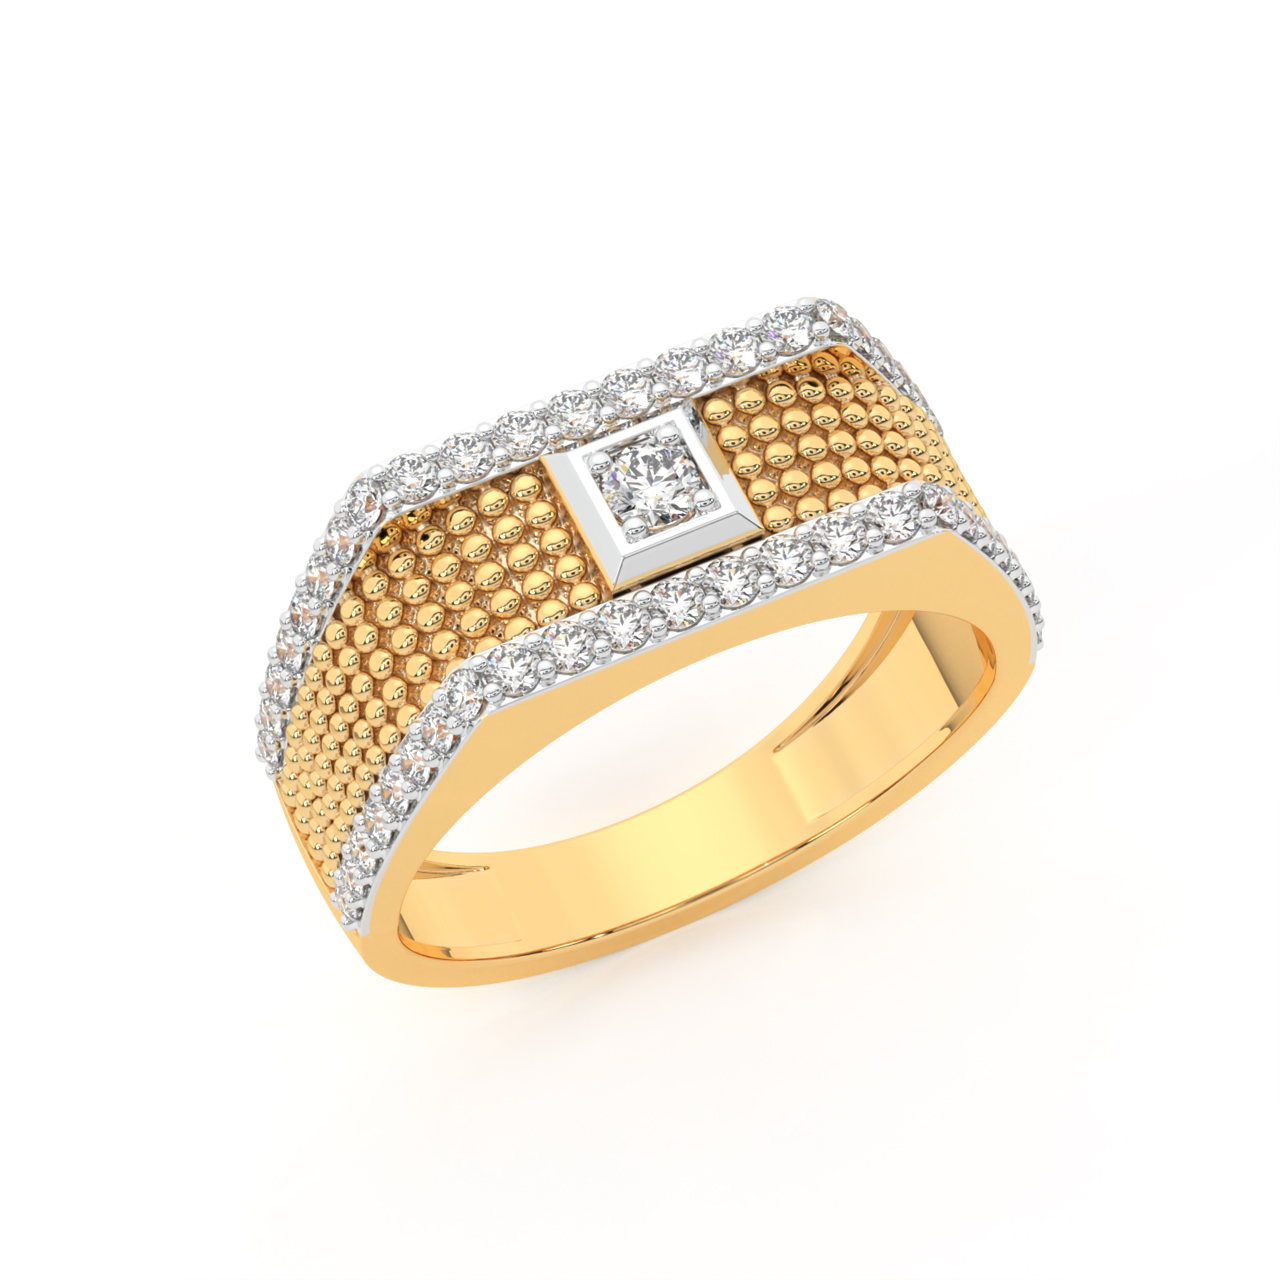 Buy quality 22.k Gold Fancy Diamond Gents Ring in Ahmedabad